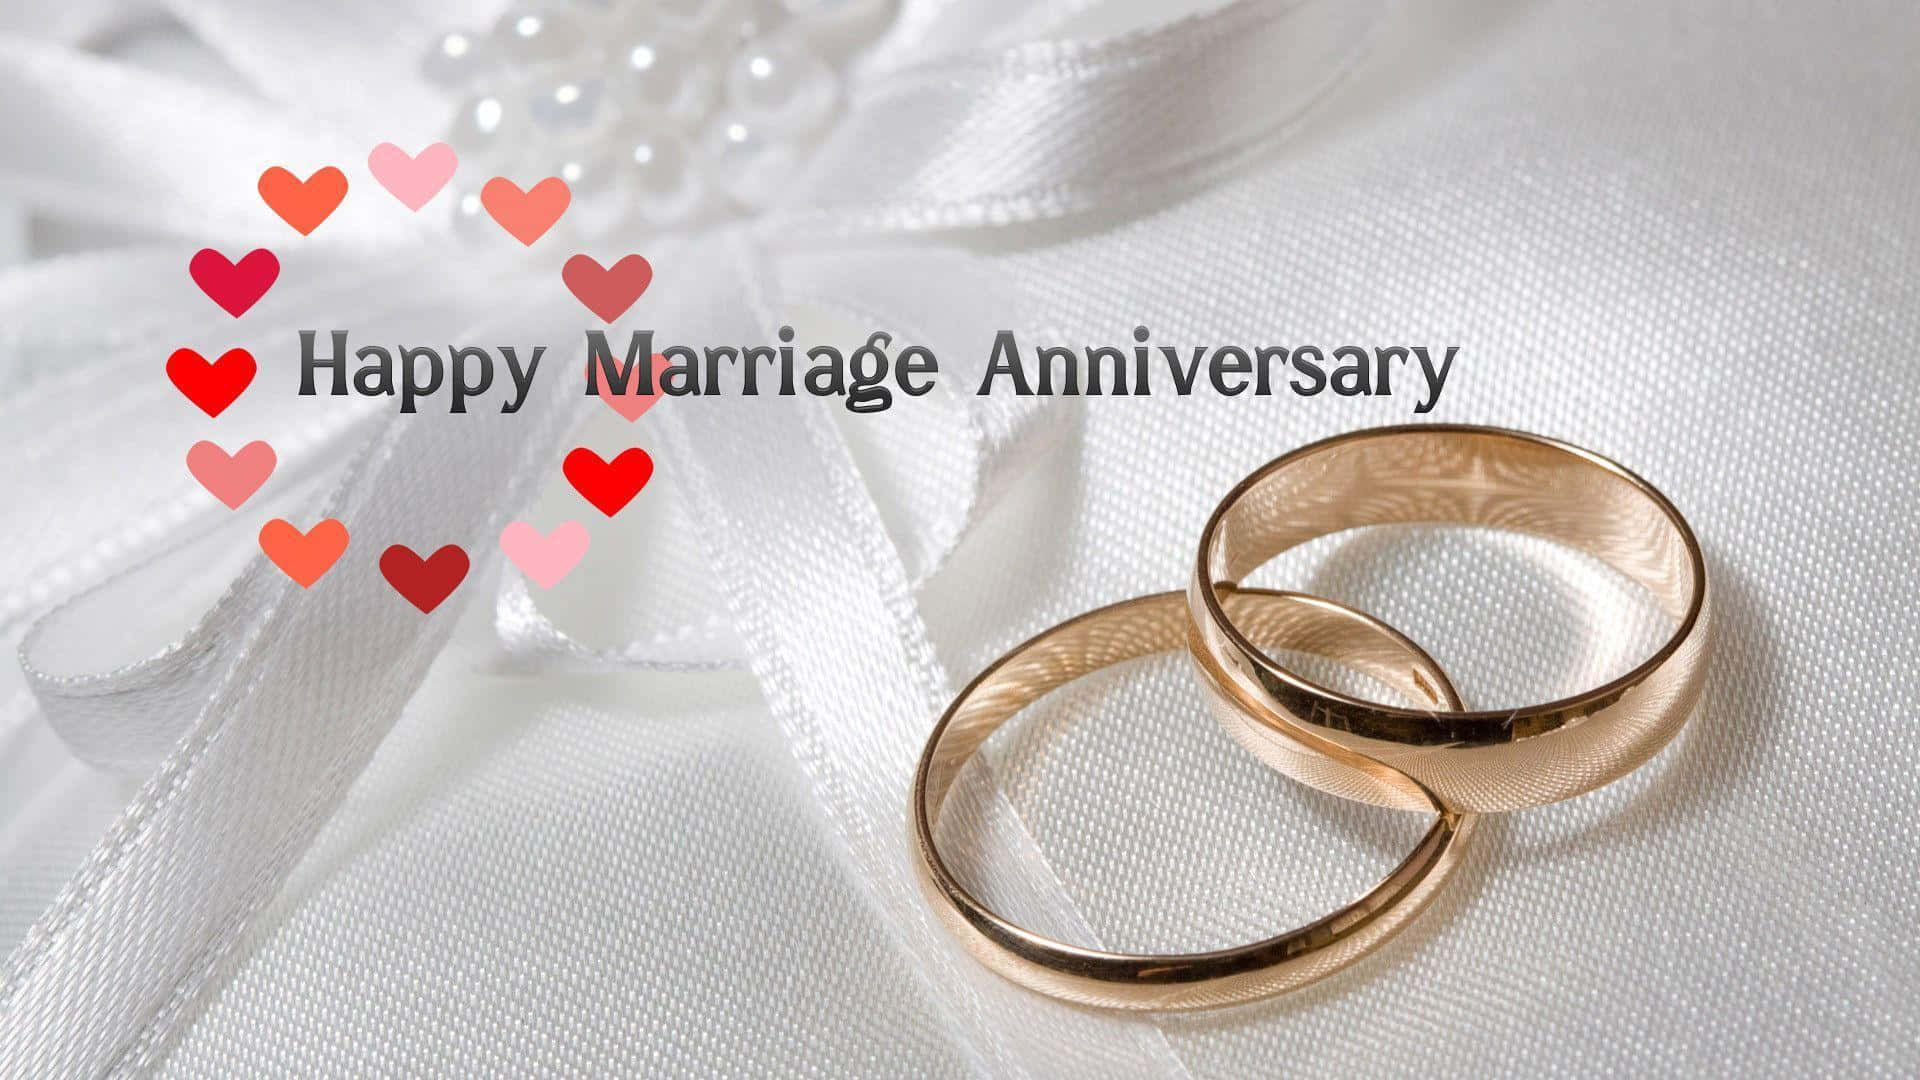 Wishing you two a Happy Anniversary!